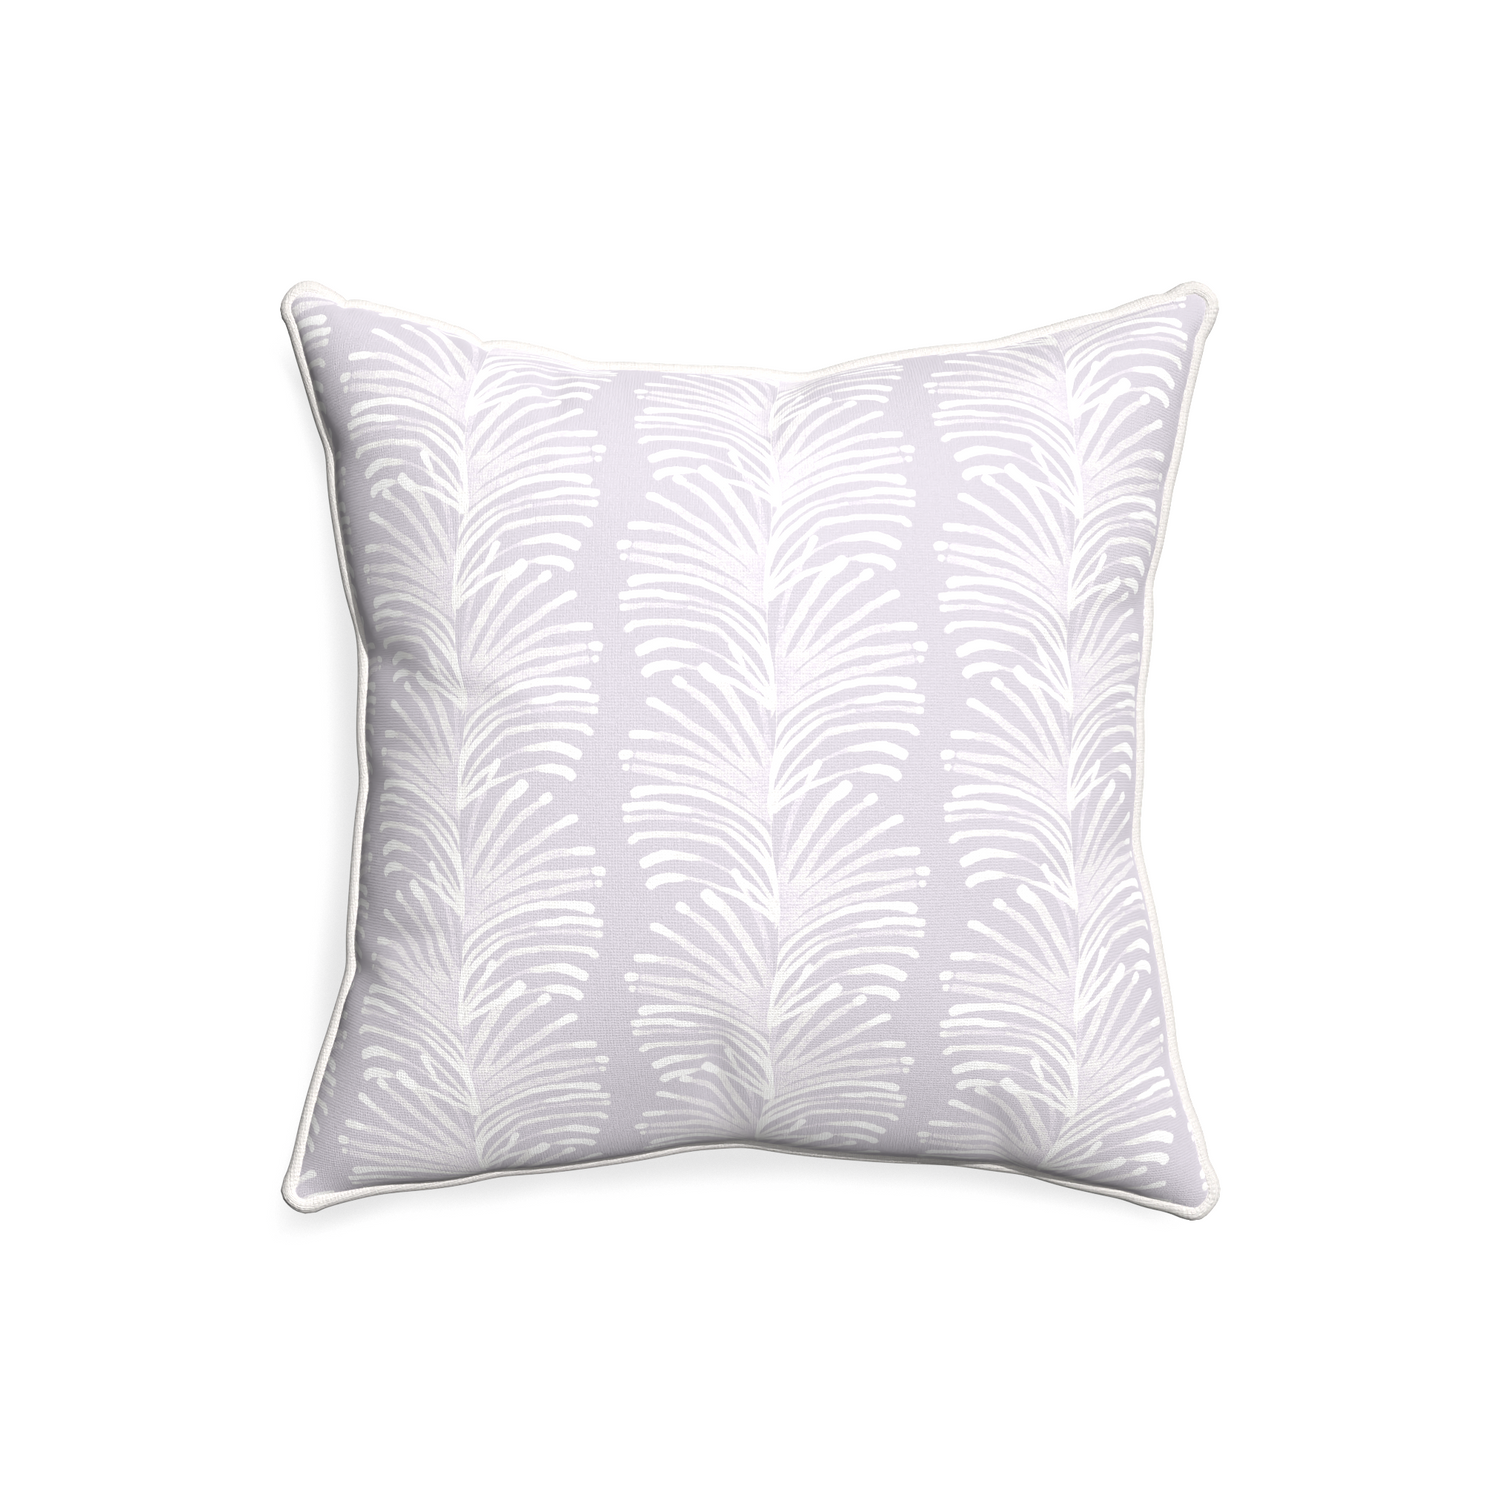 20-square emma lavender custom lavender botanical stripepillow with snow piping on white background